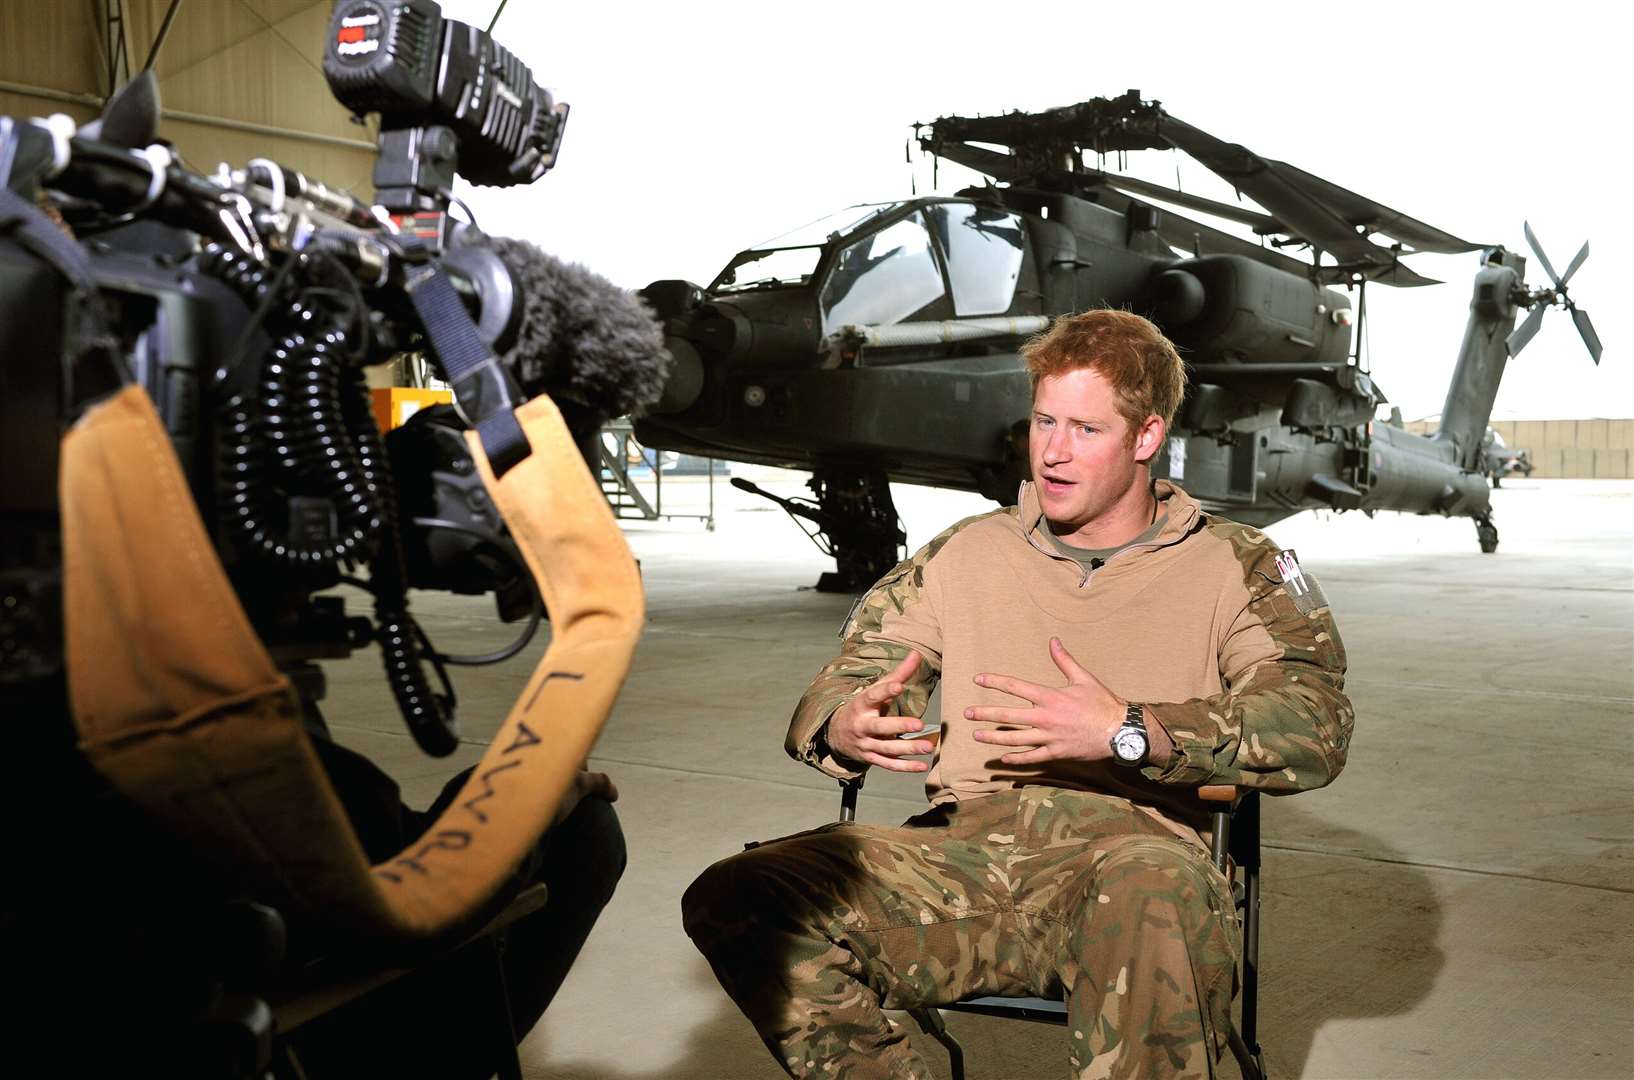 Harry being interviewed in an Apache repair hanger at Camp Bastion during his tour of duty in Afghanistan (John Stillwell/PA)